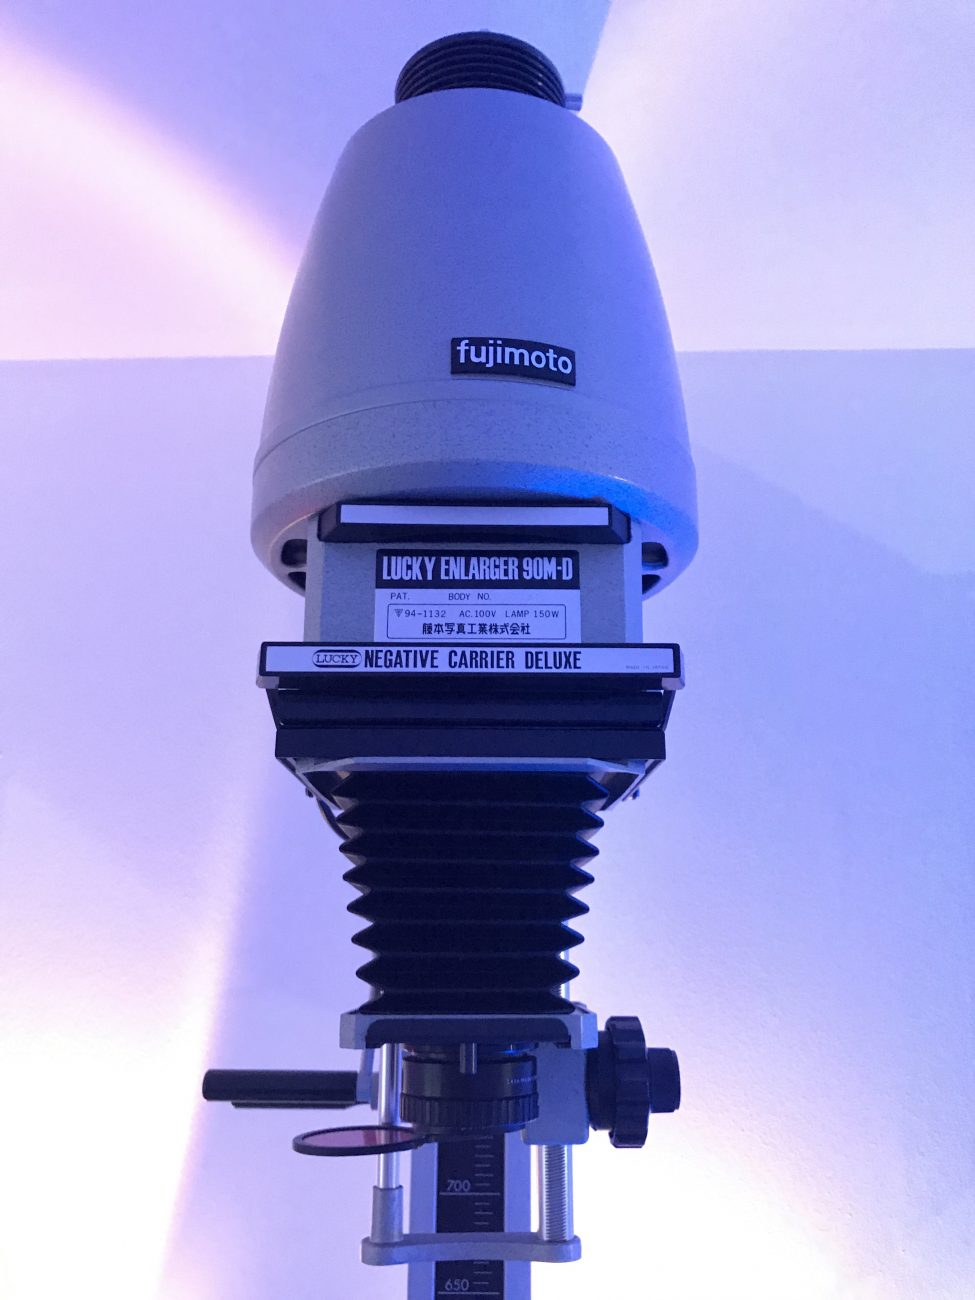 Fujimoto LUCKY ENLARGER 90M-D – a really solid piece of equipment 